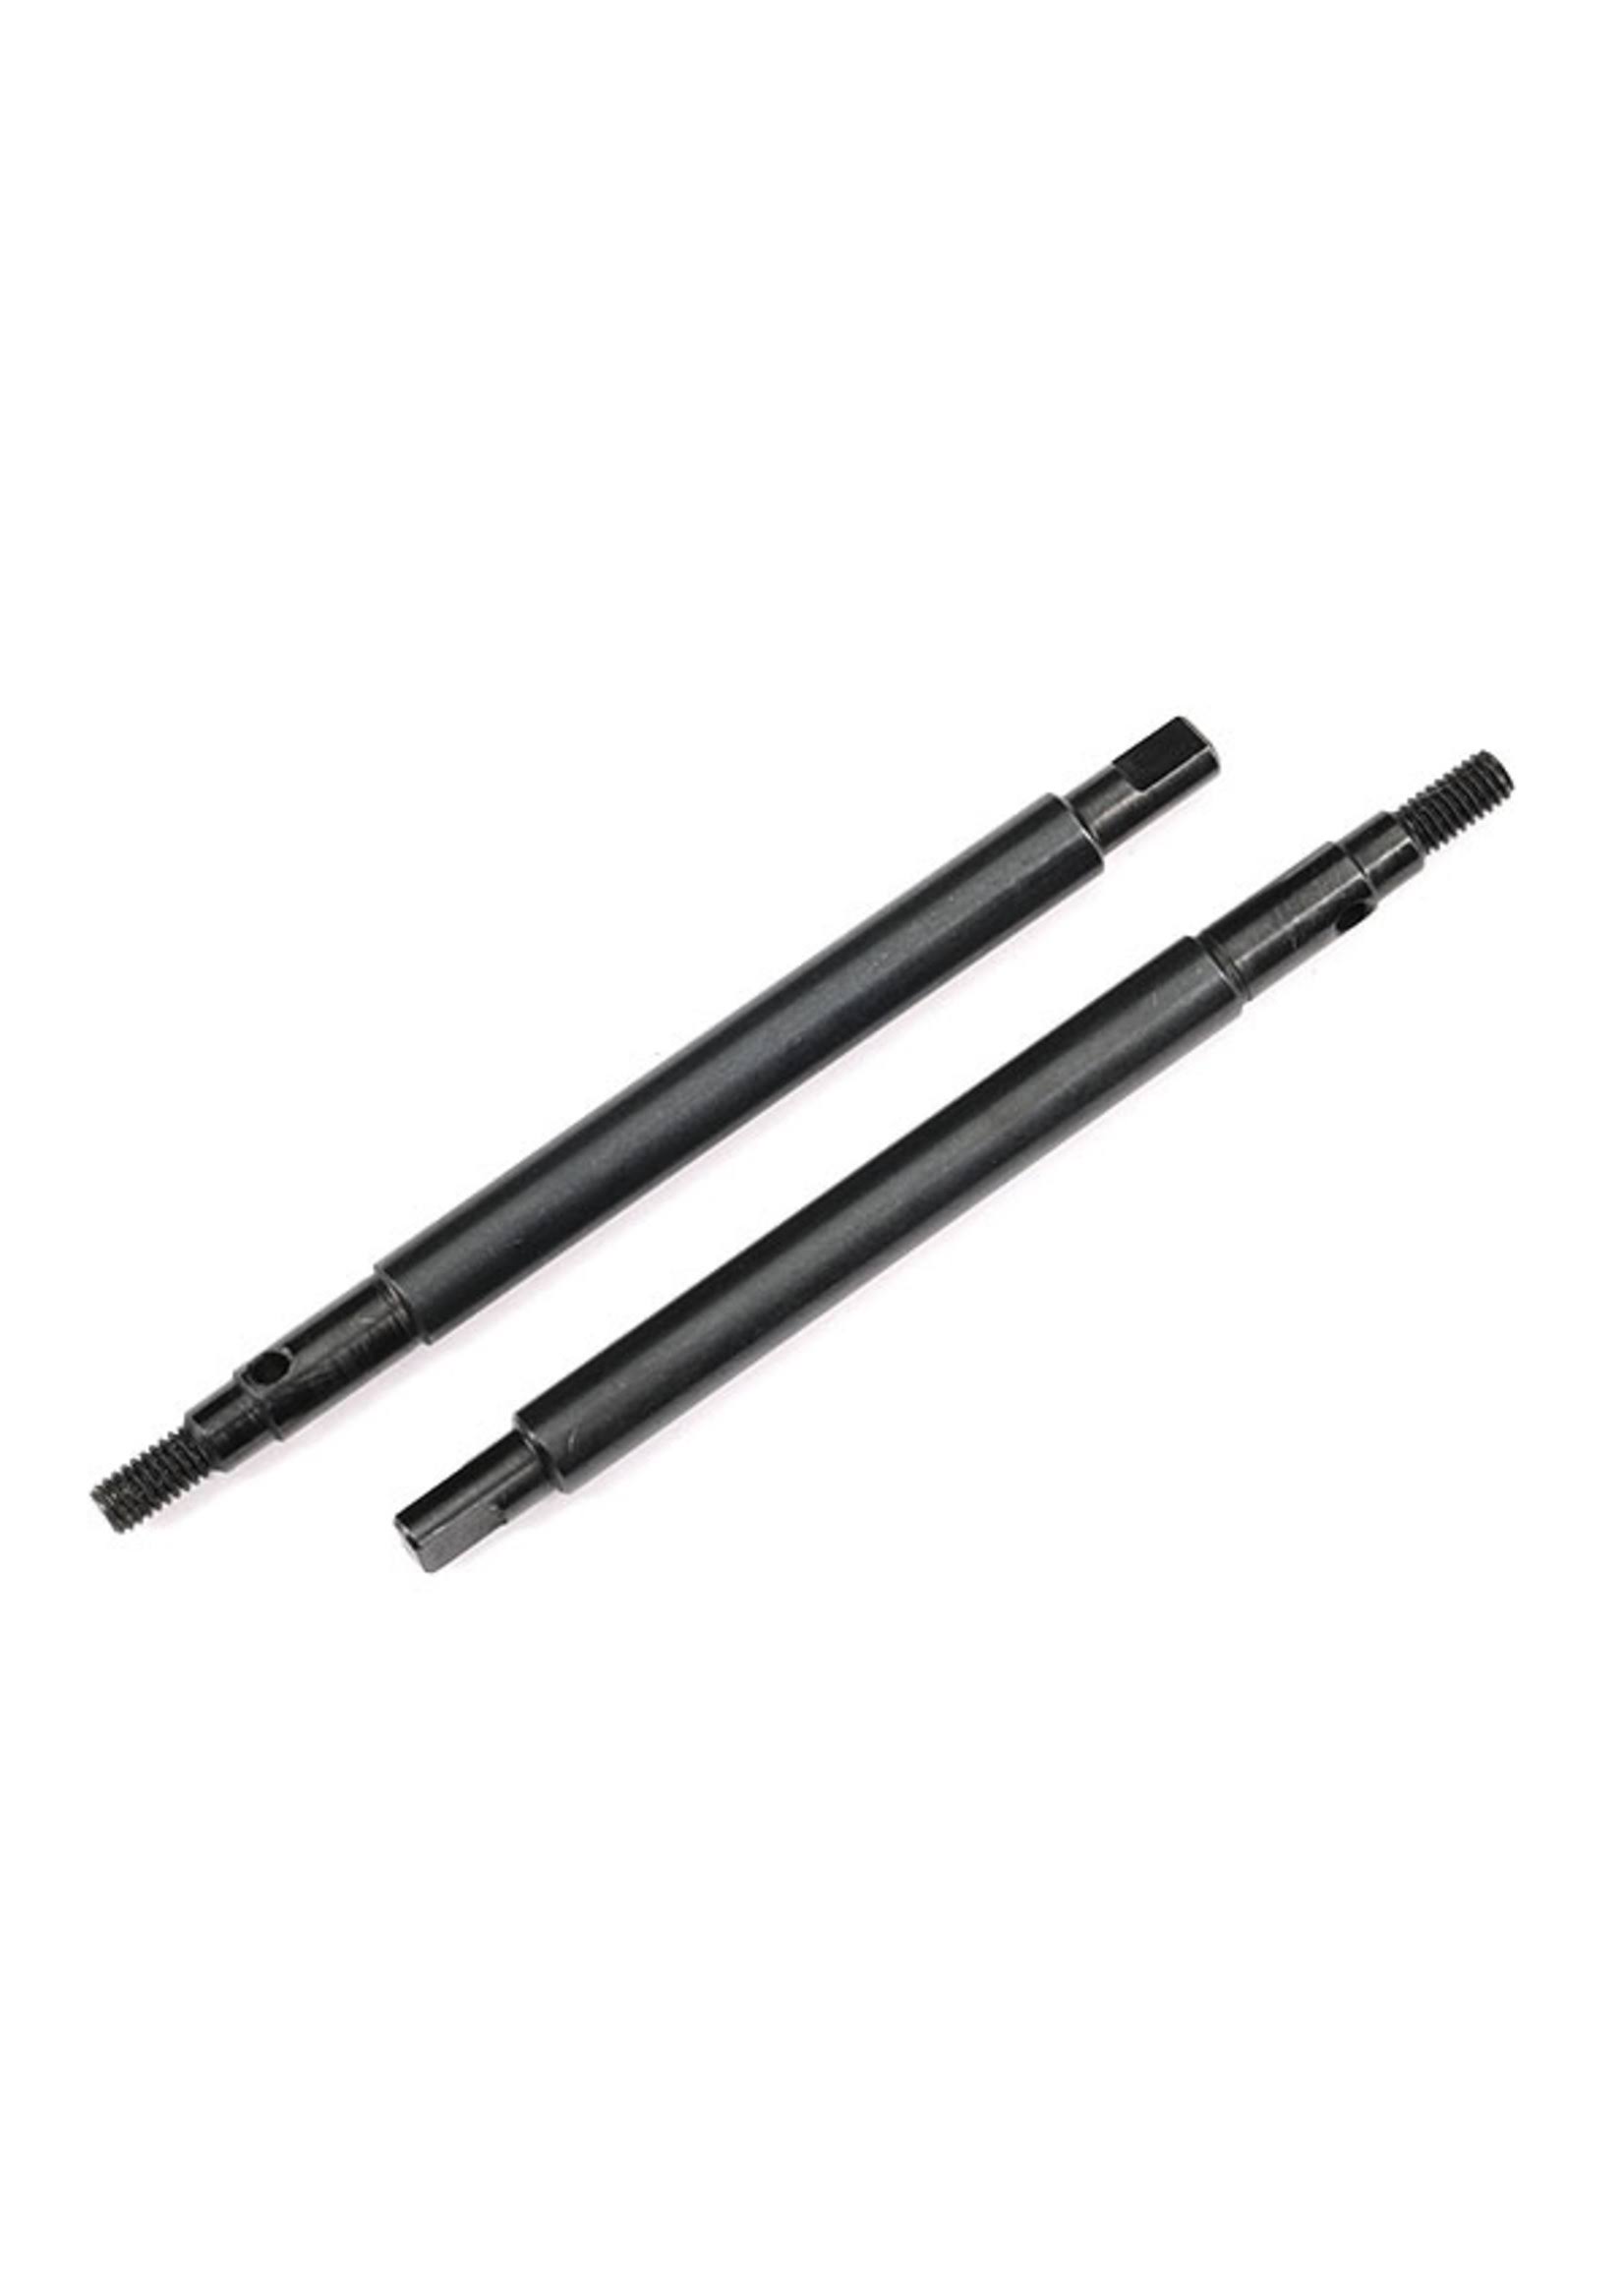 Traxxas 9730 Axle Shafts, Rear, Outer (2)